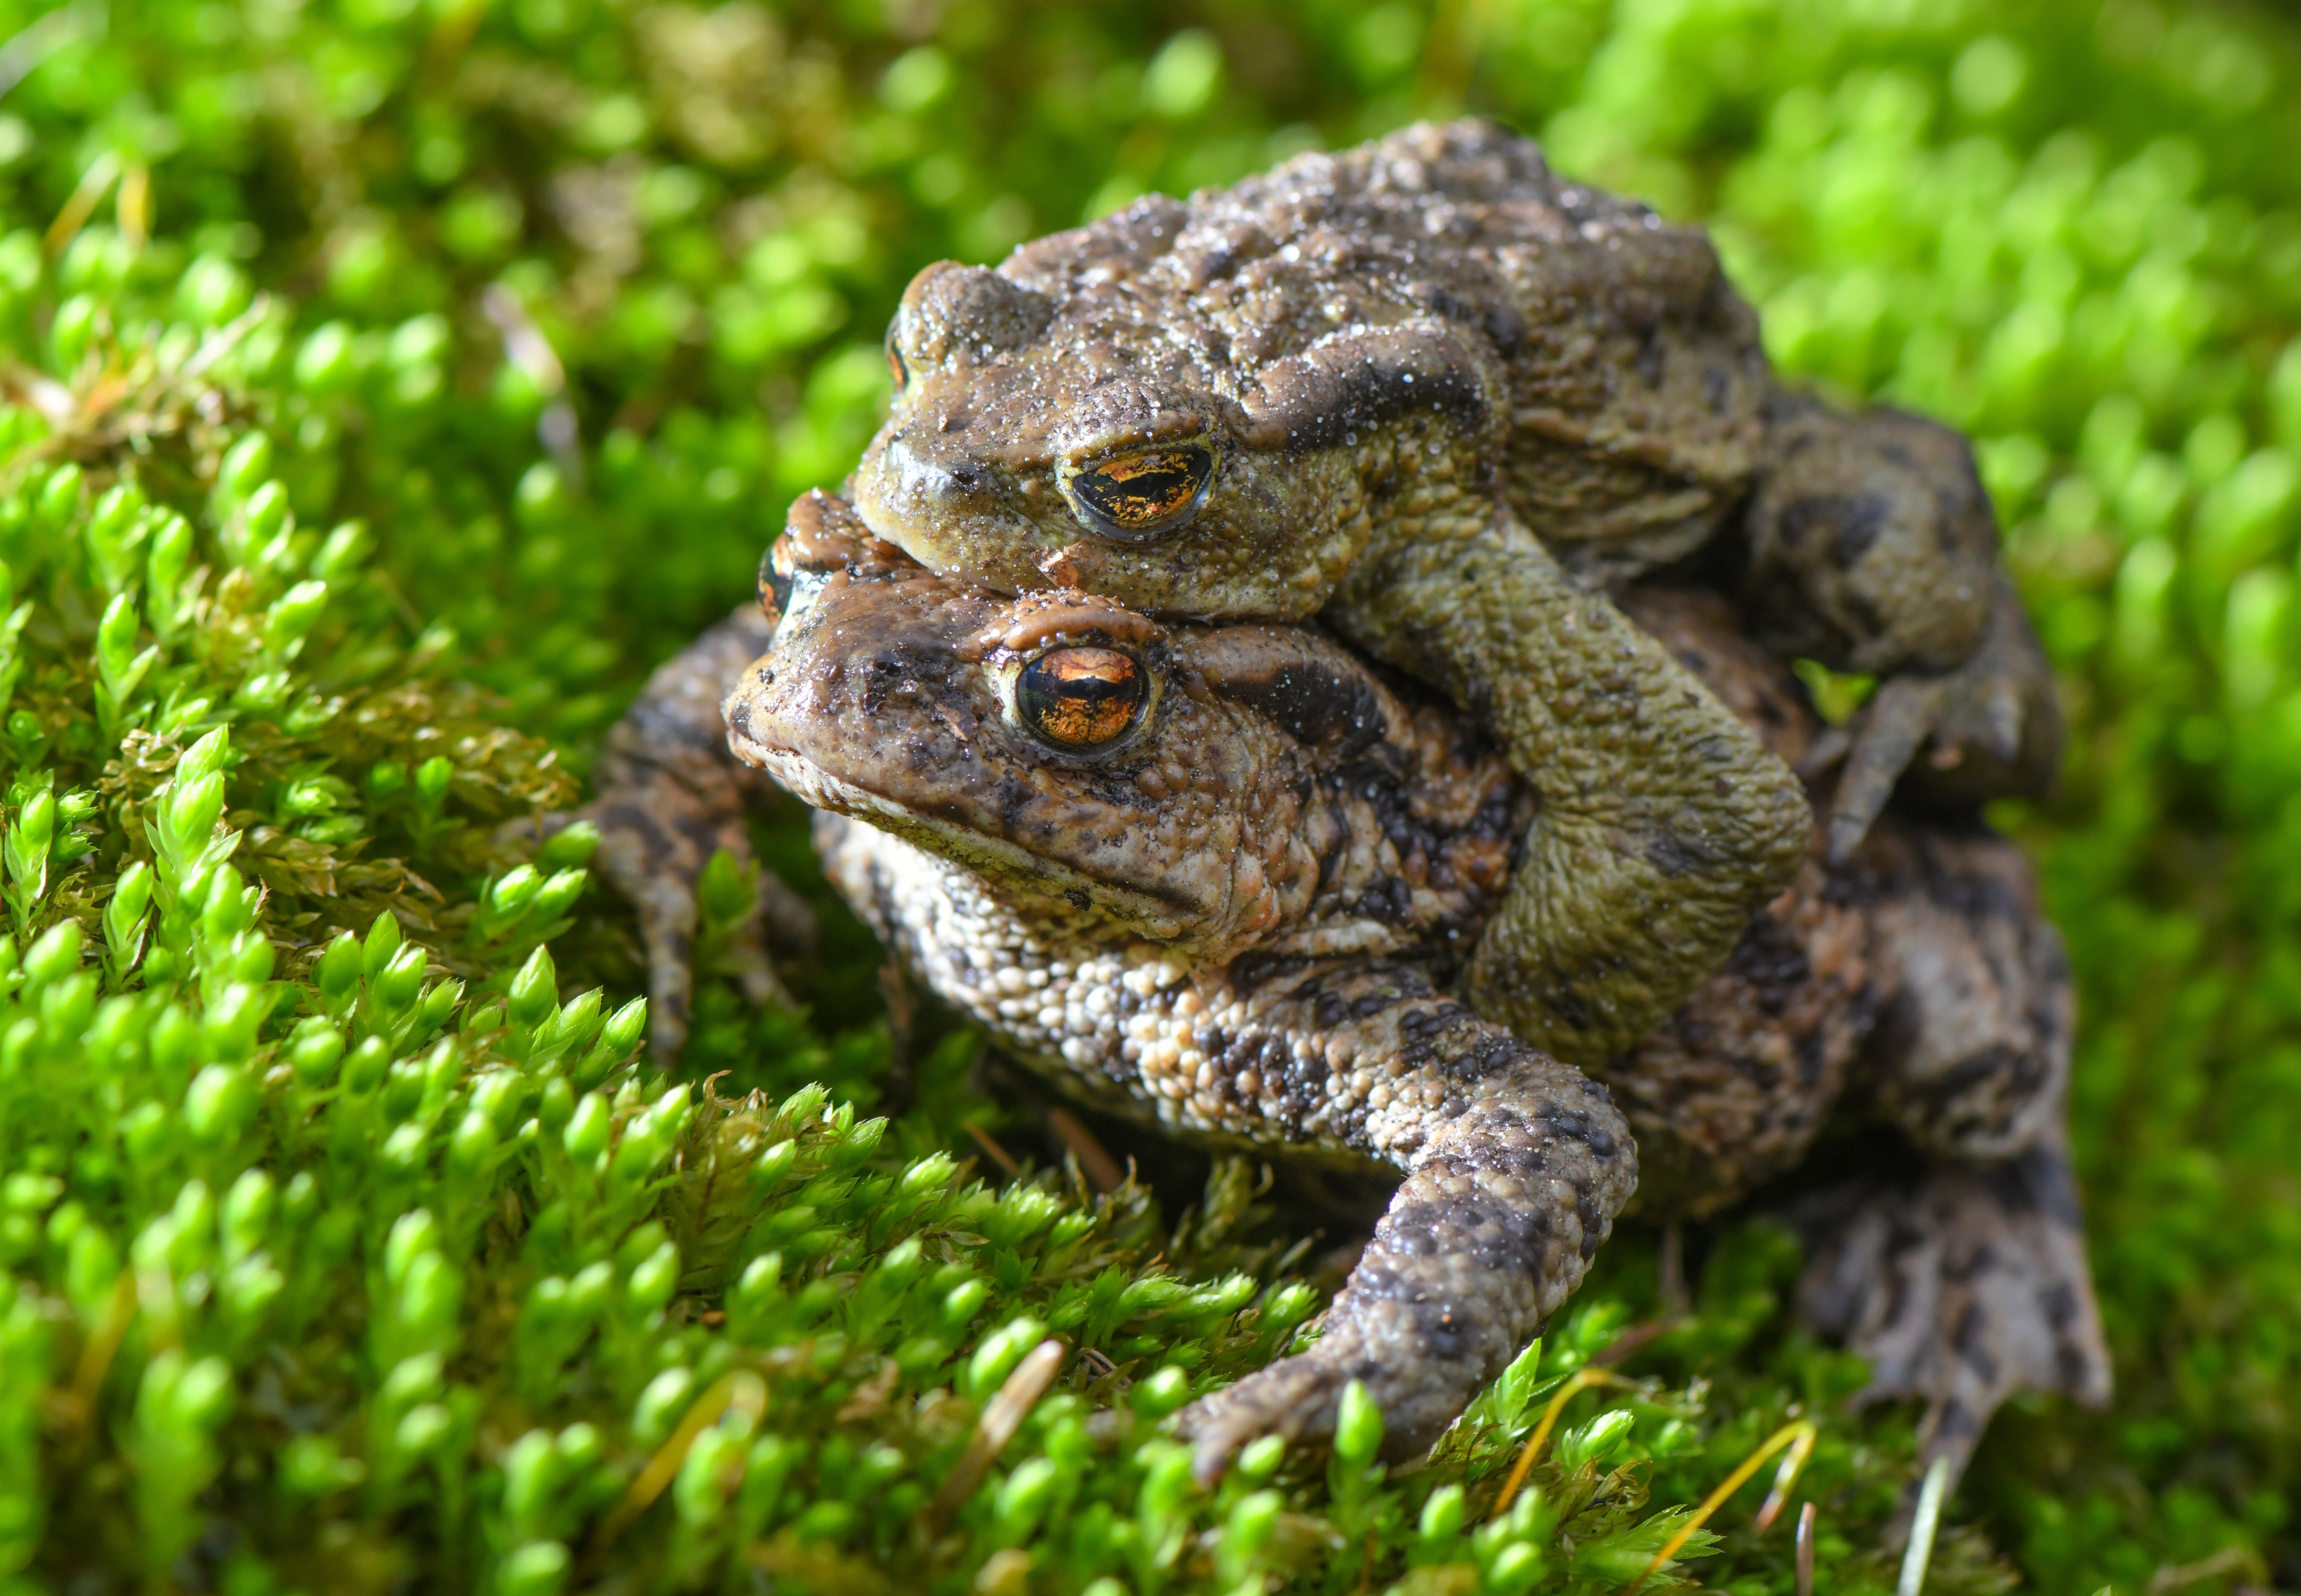 A pair of bufo toads crawl over moss on the edge of a small pond in Brandenburg, Germany on March 22, 2019. (Patrick Pleul&mdash;Picture-alliance/dpa/Getty Images)